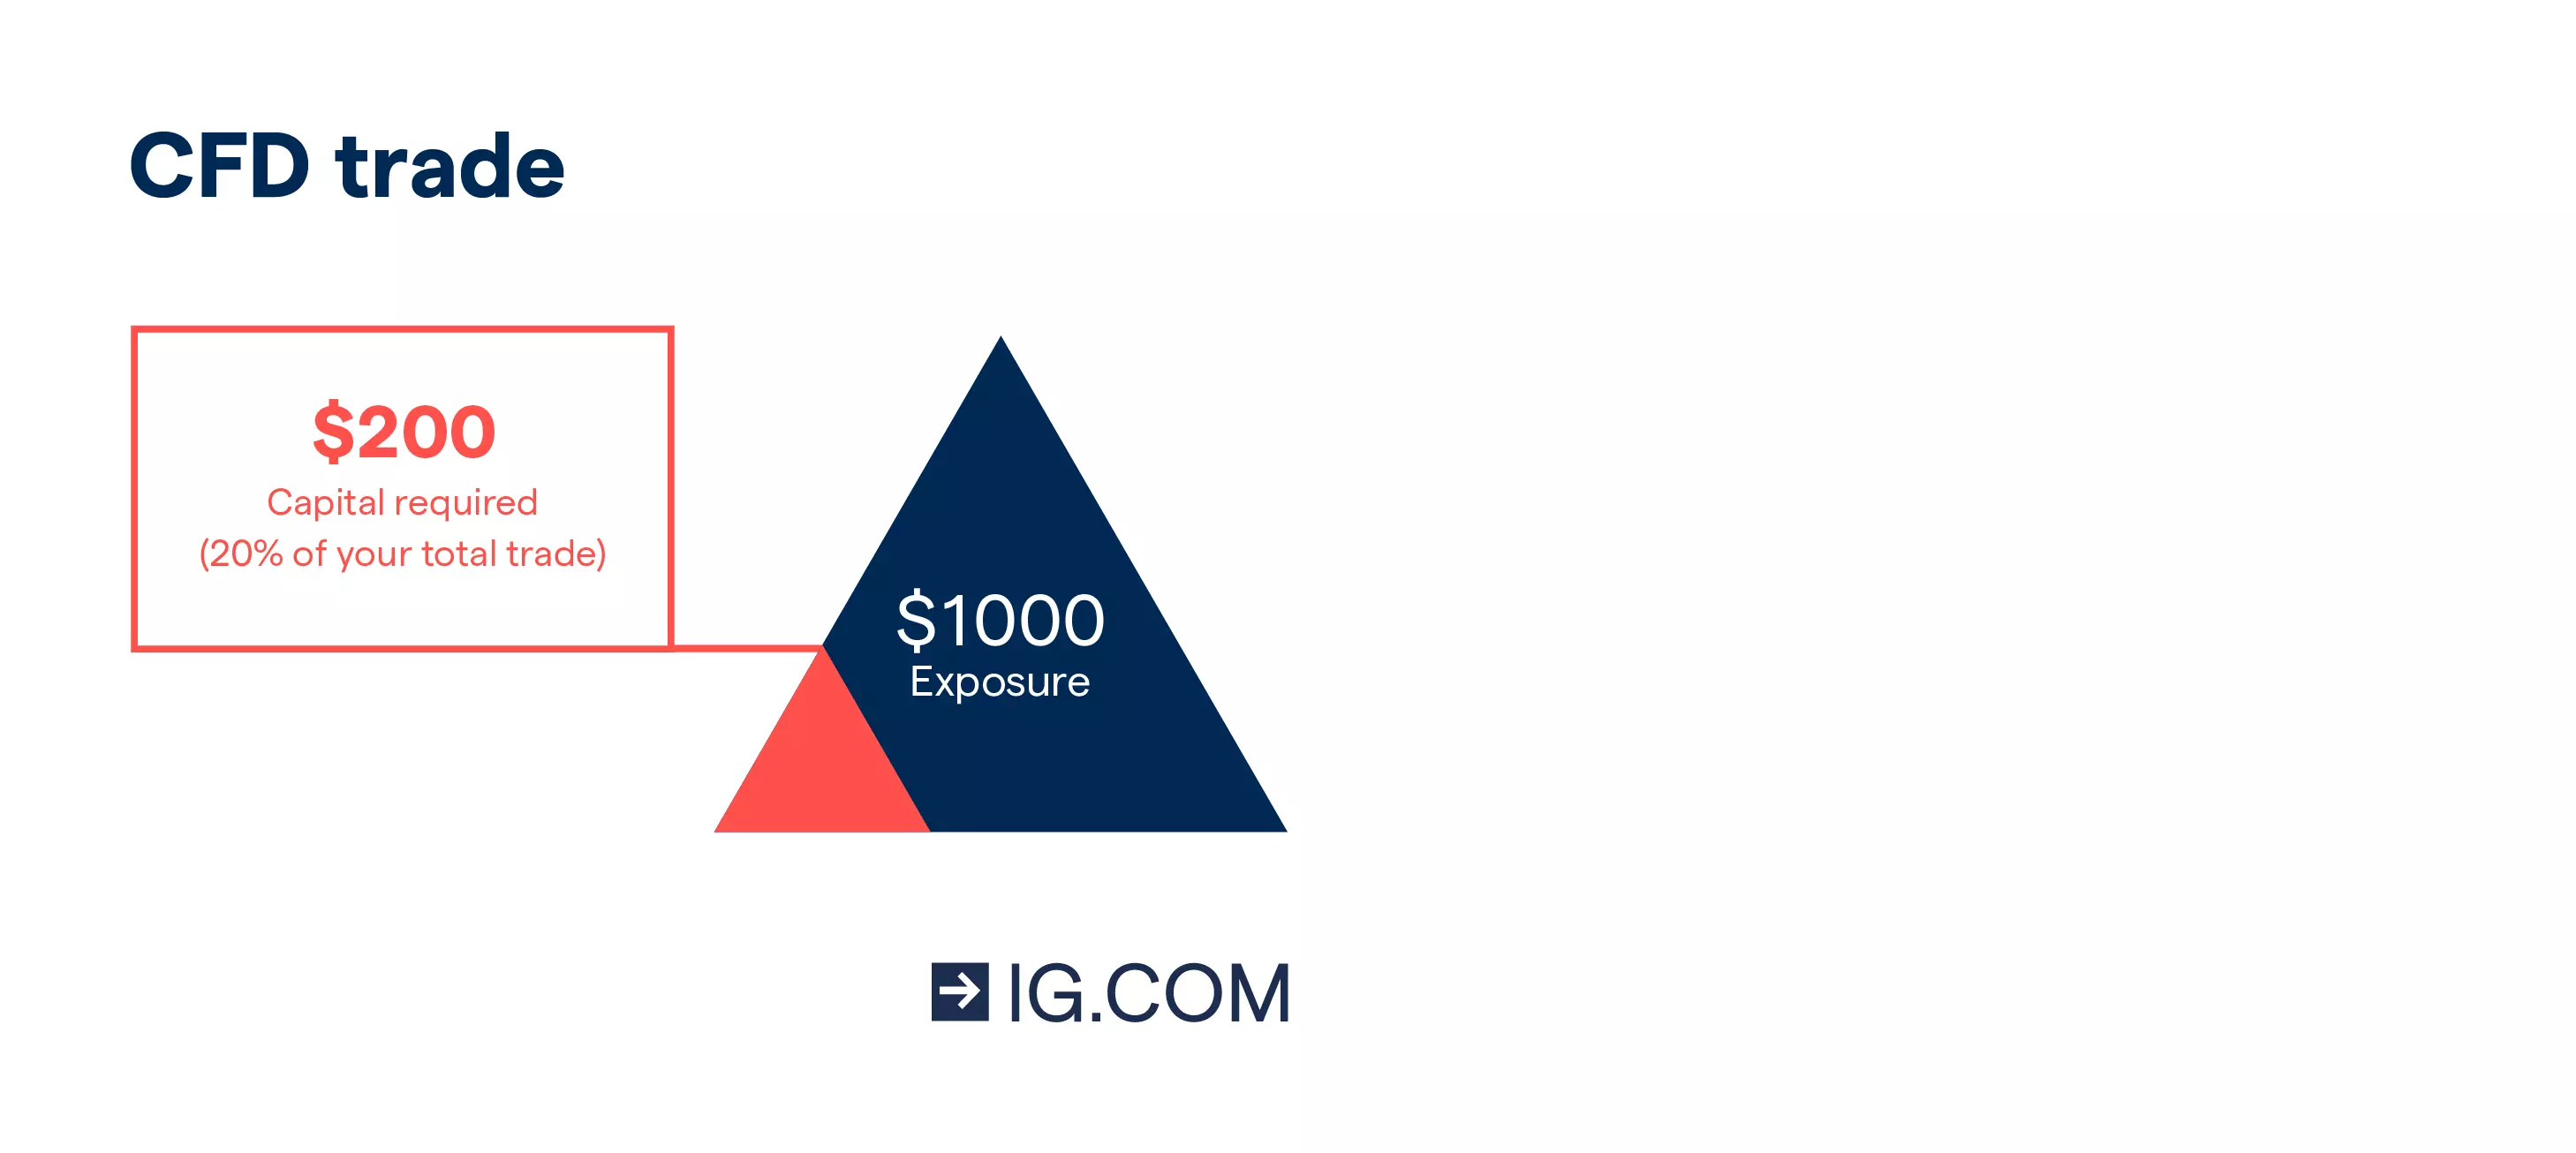 A graphic showing that a position worth $1000 require a $200 deposit with a margin of 20%.